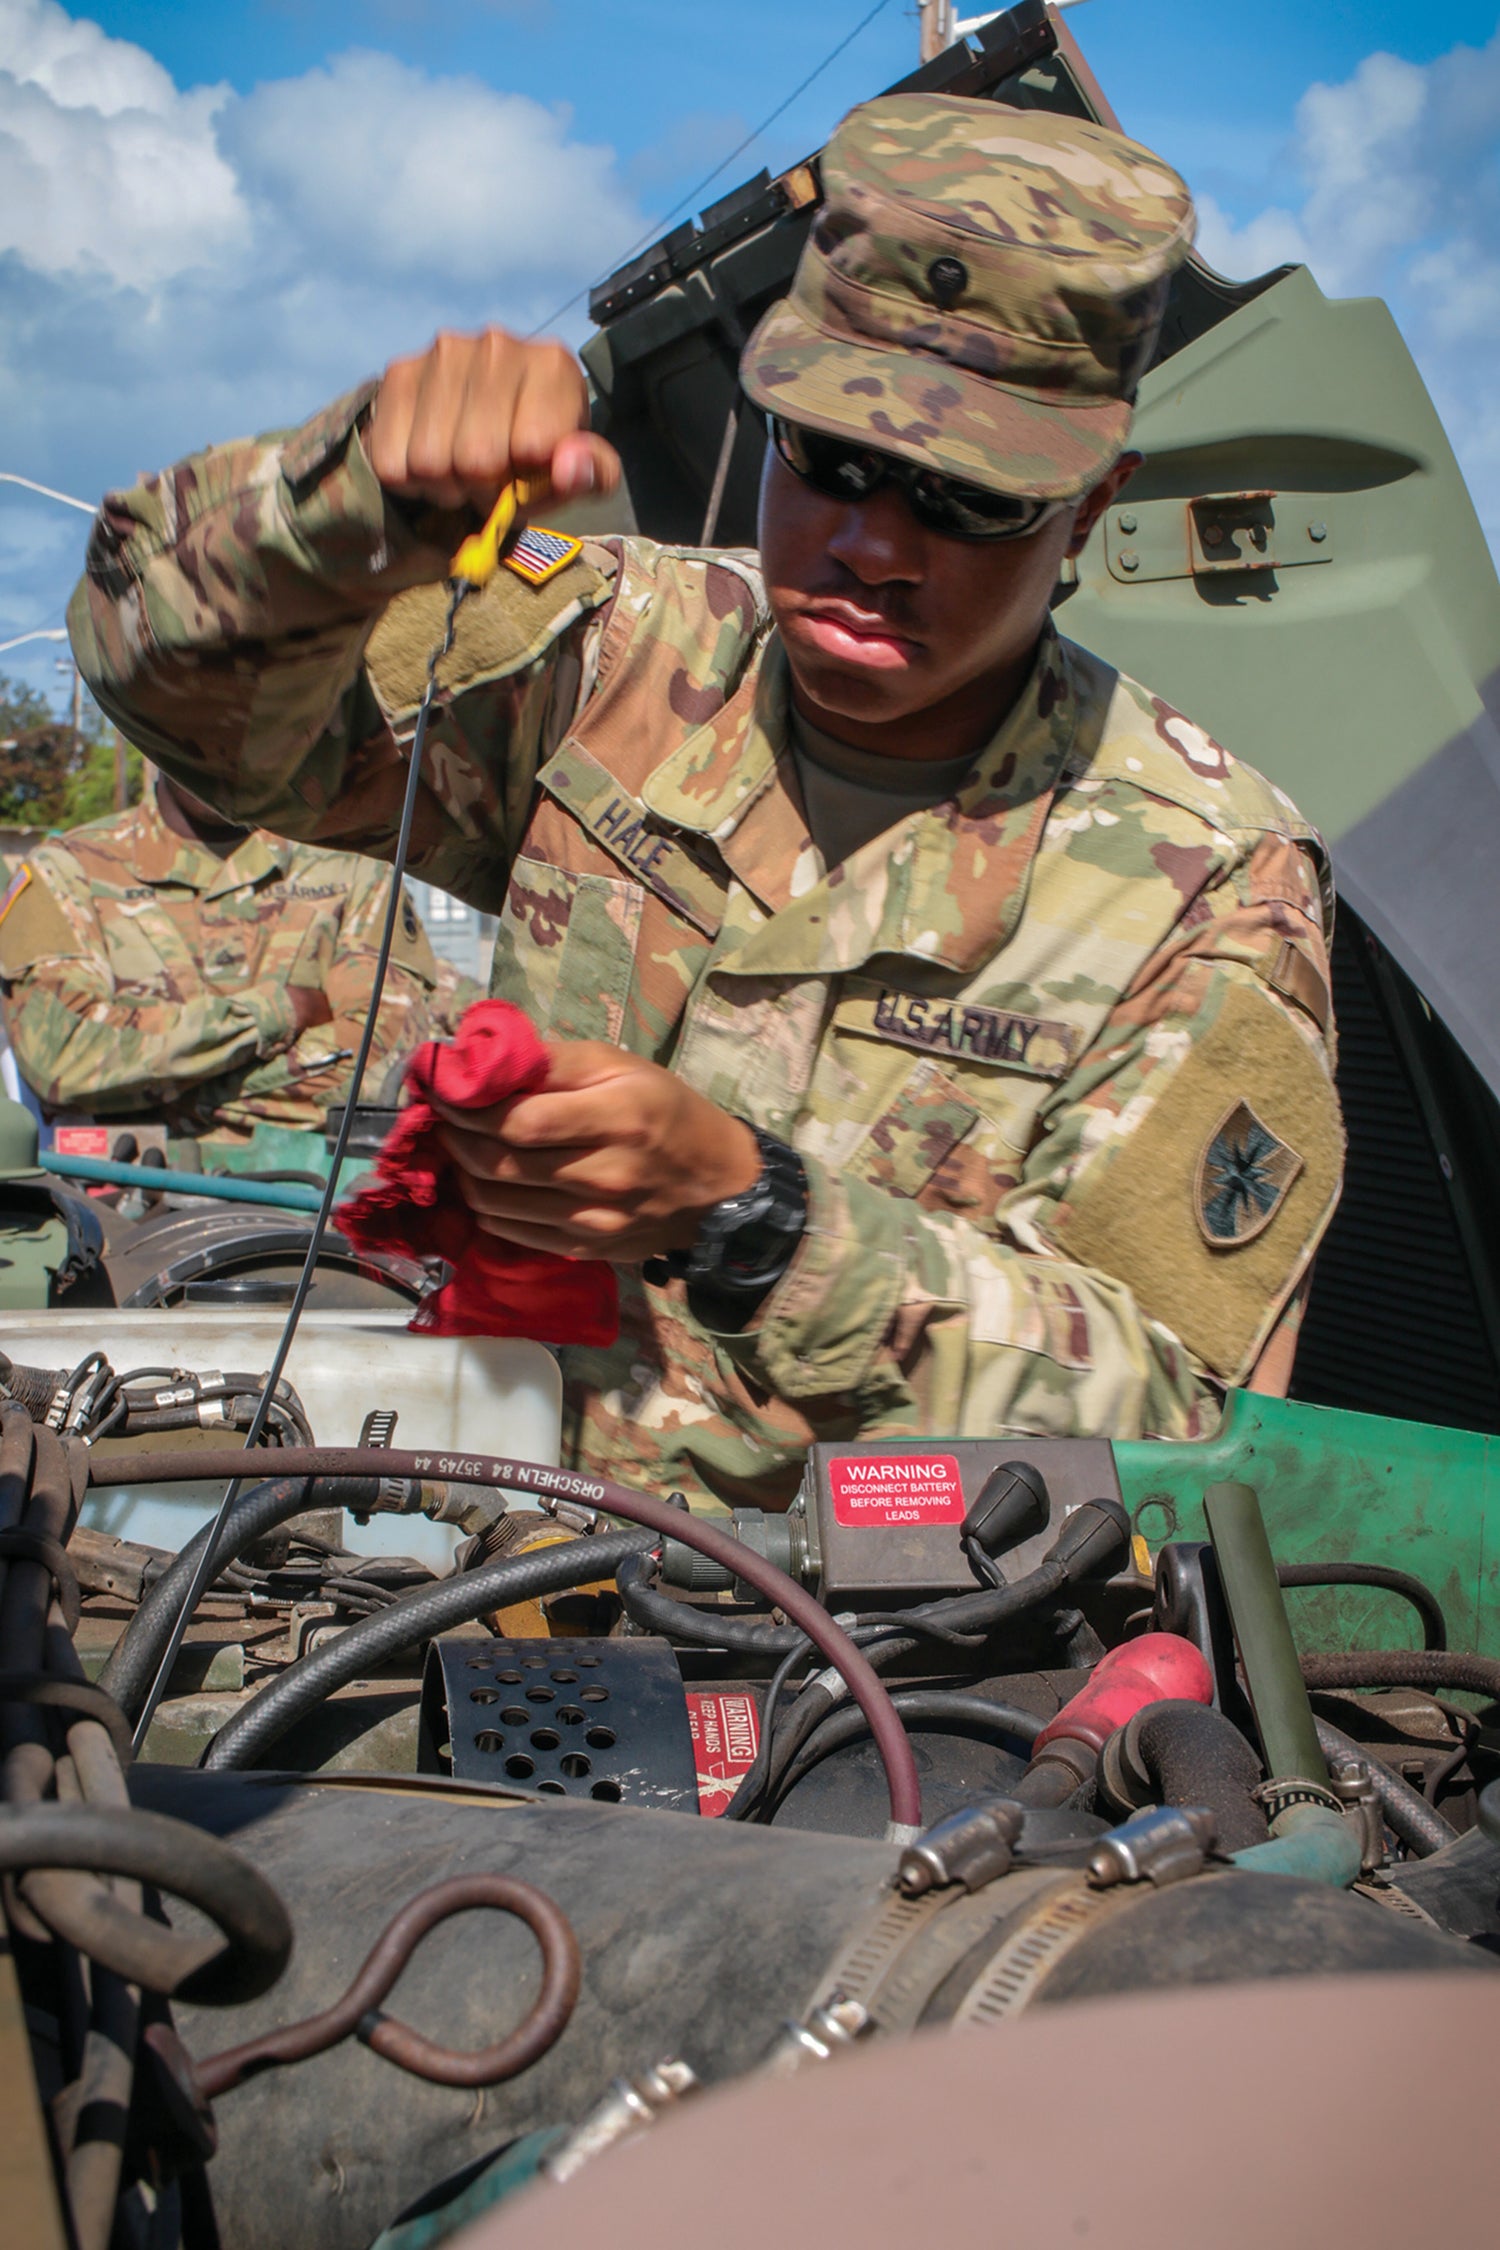 A soldier with the 8th Theater Sustainment Command performs preventive maintenance on a vehicle at Fort Shafter, Hawaii. (Credit: U.S. Army//Spc. Geordan Tyquiengco)